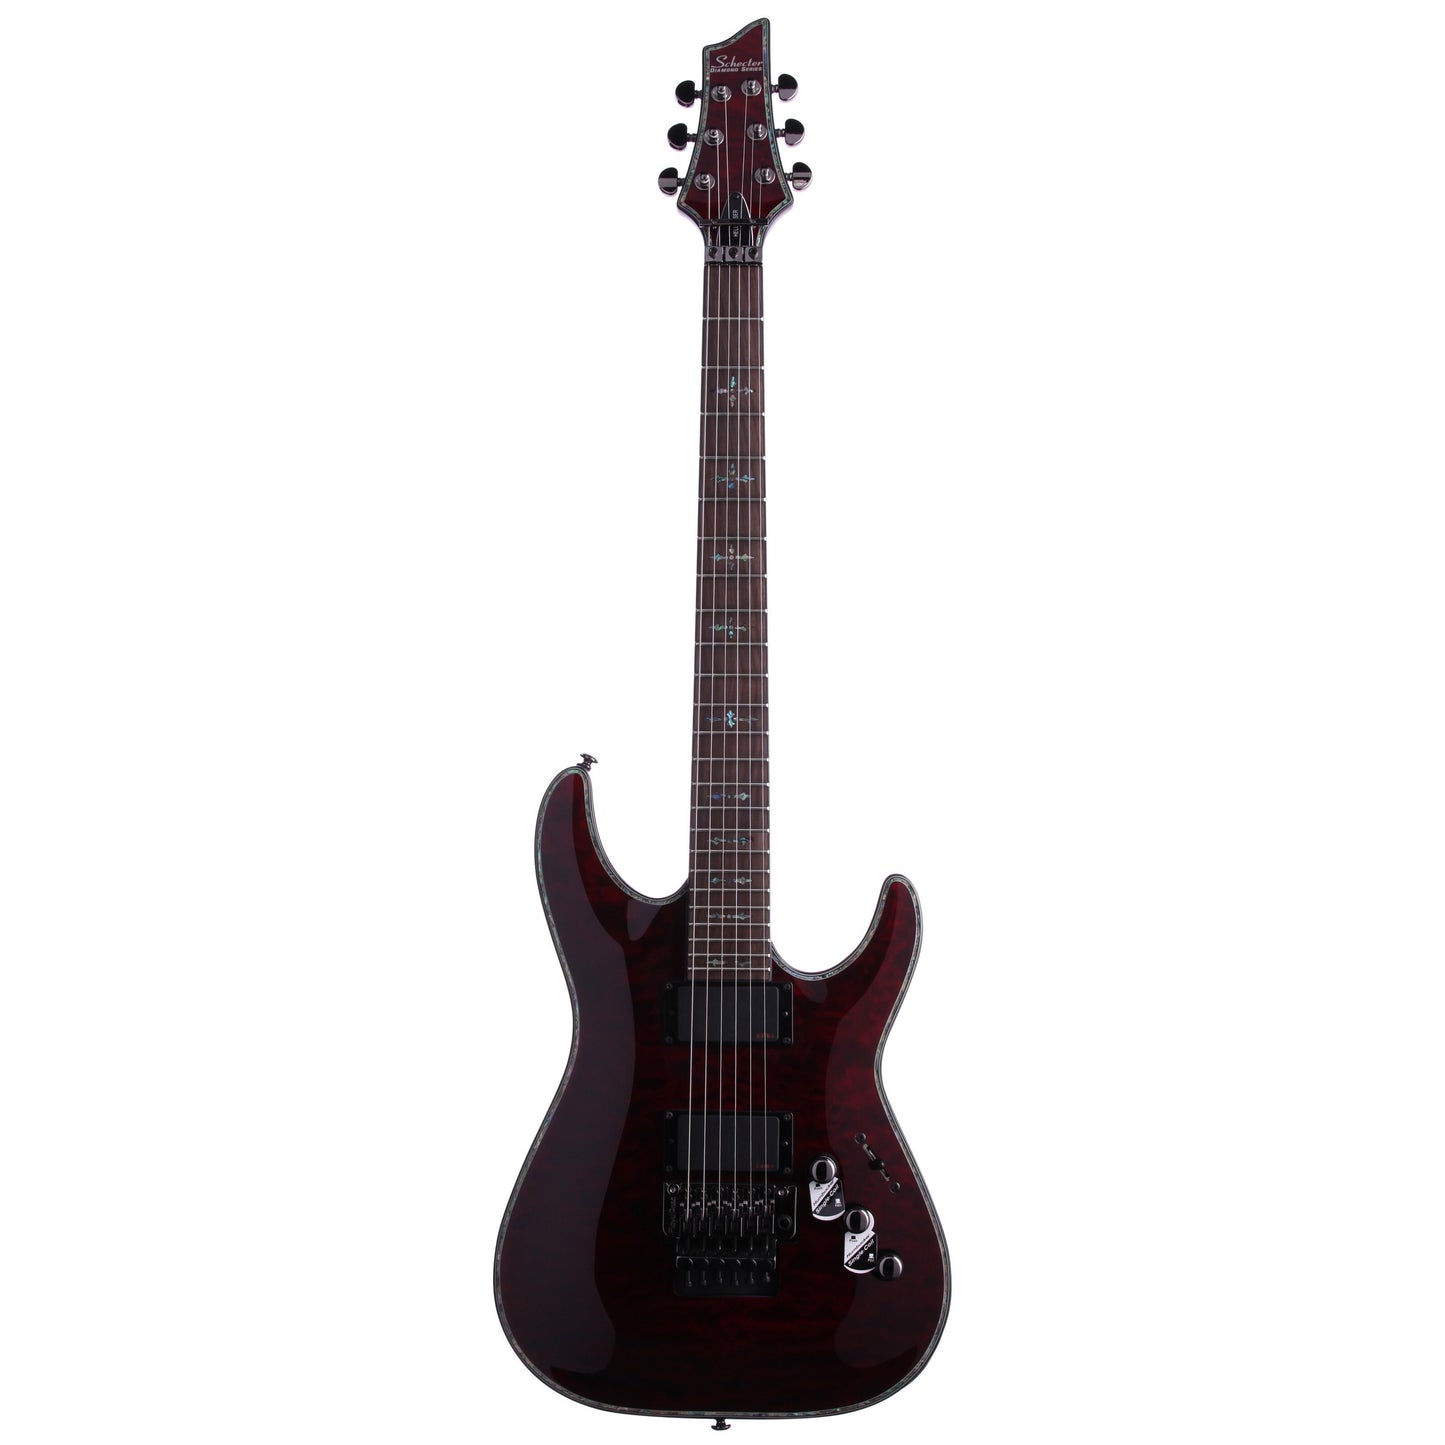 Schecter C1 Hellraiser FR Electric Guitar with Floyd Rose, Black Cherry